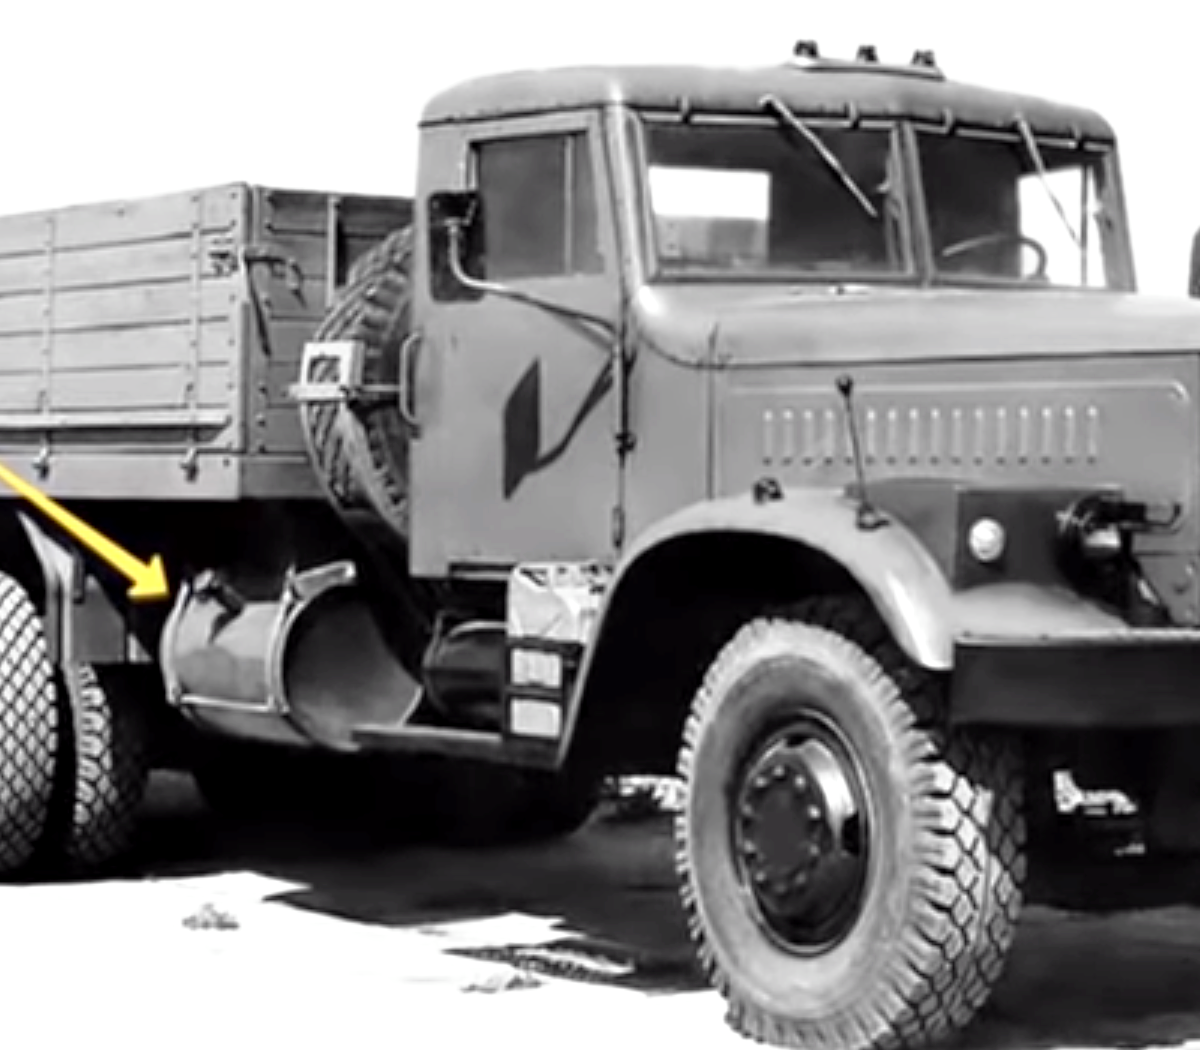 Why did KrAZ have a round fuel tank?